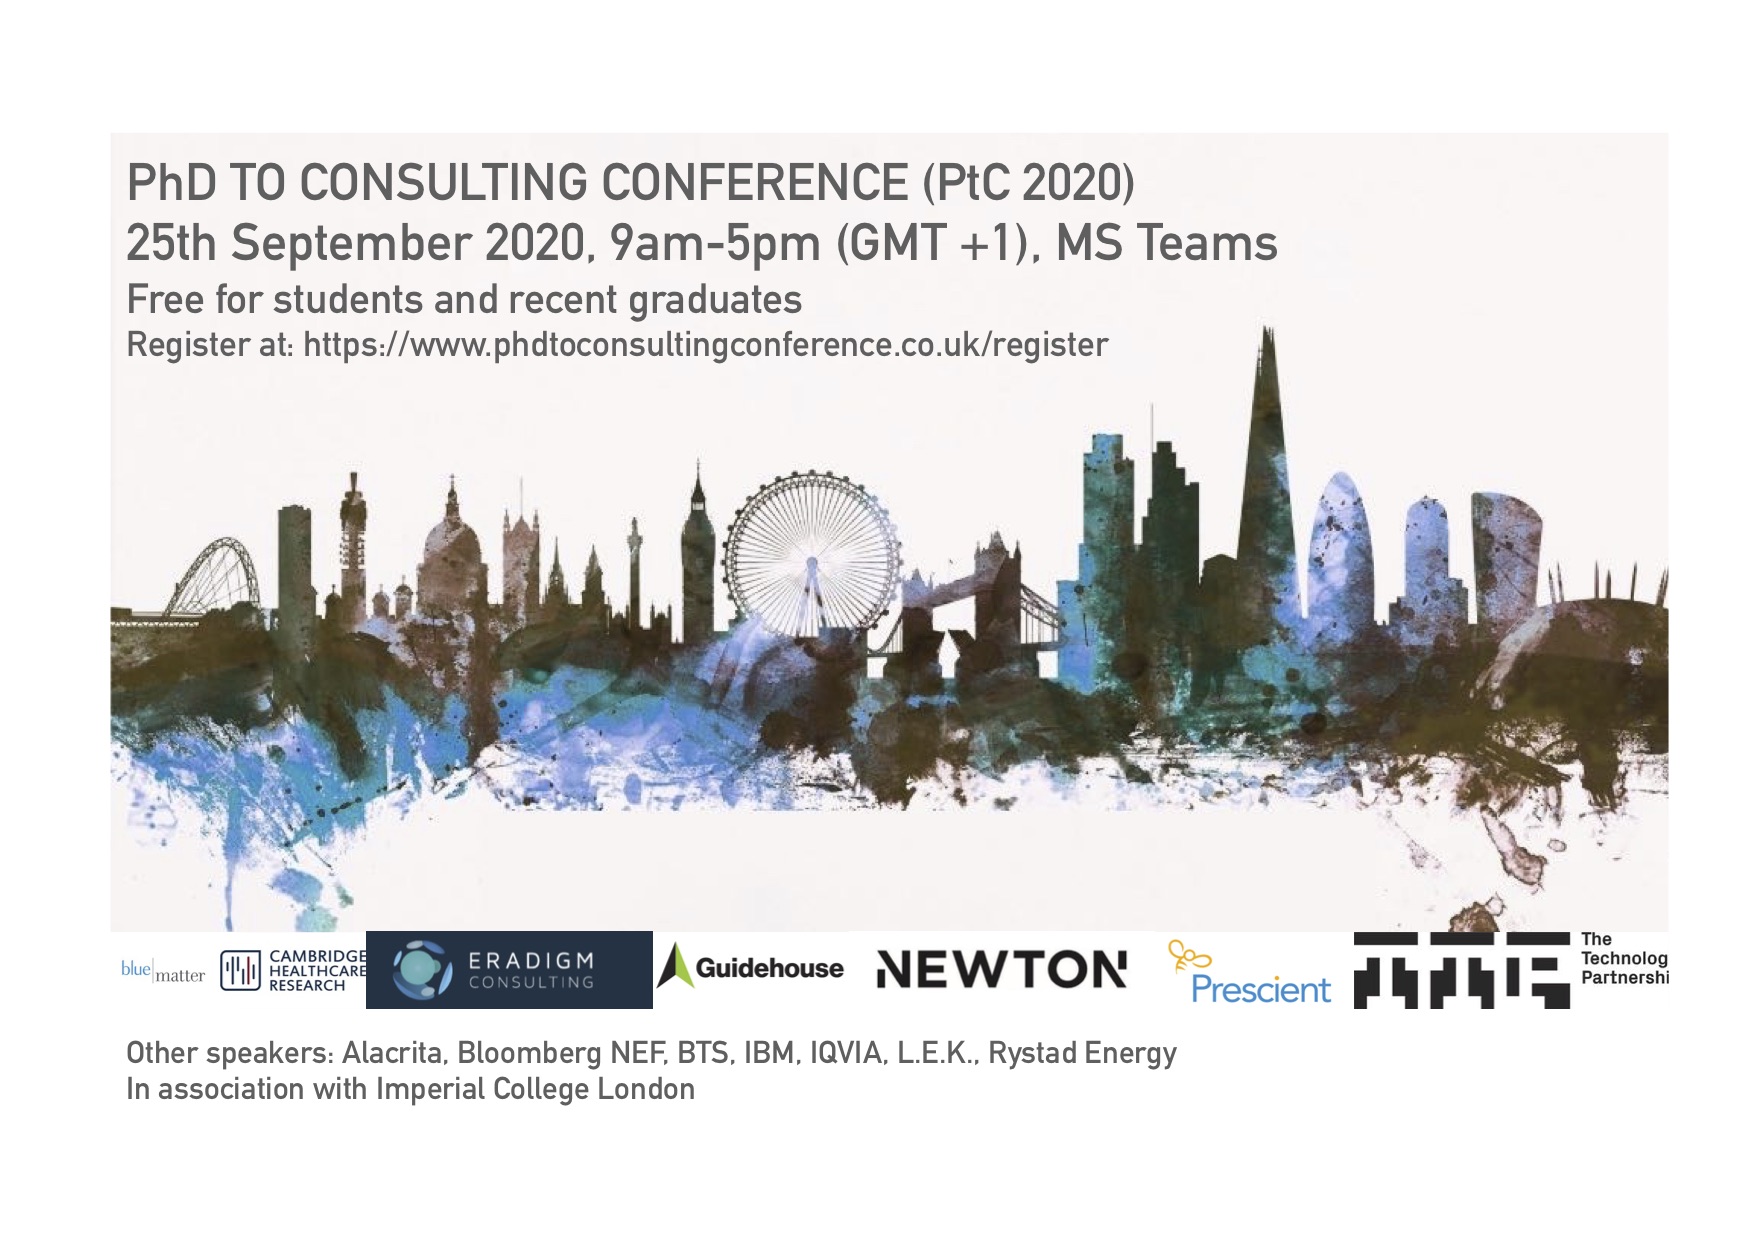 PhD to Consulting Conference 2020 infographic